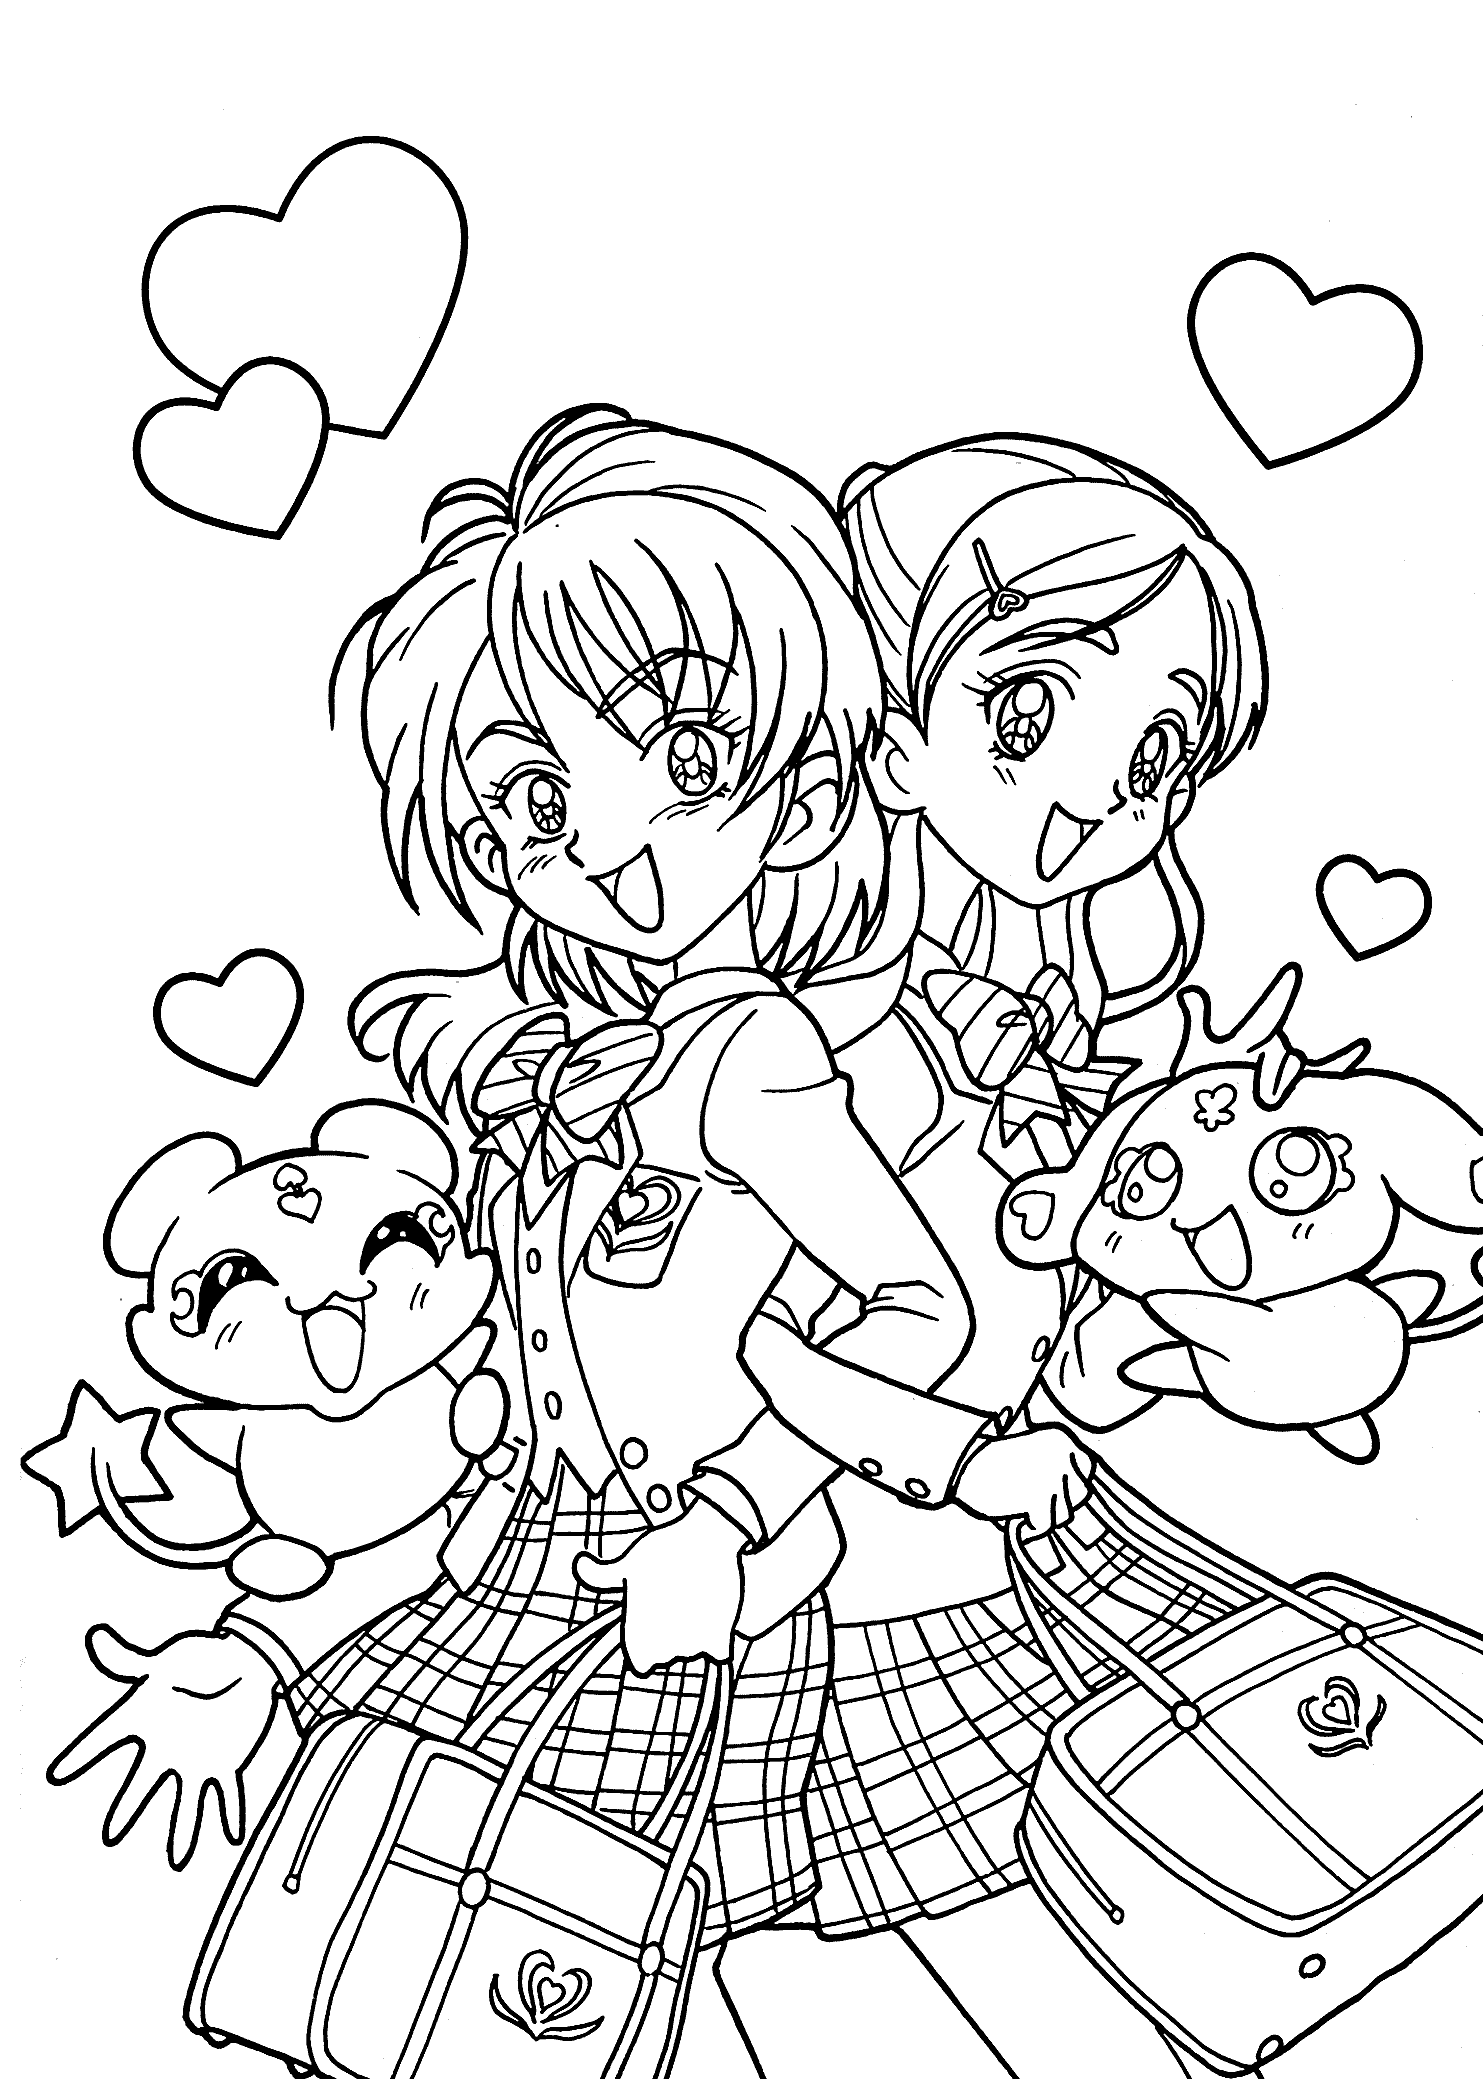 Free coloring page anime art by VentulArt on DeviantArt